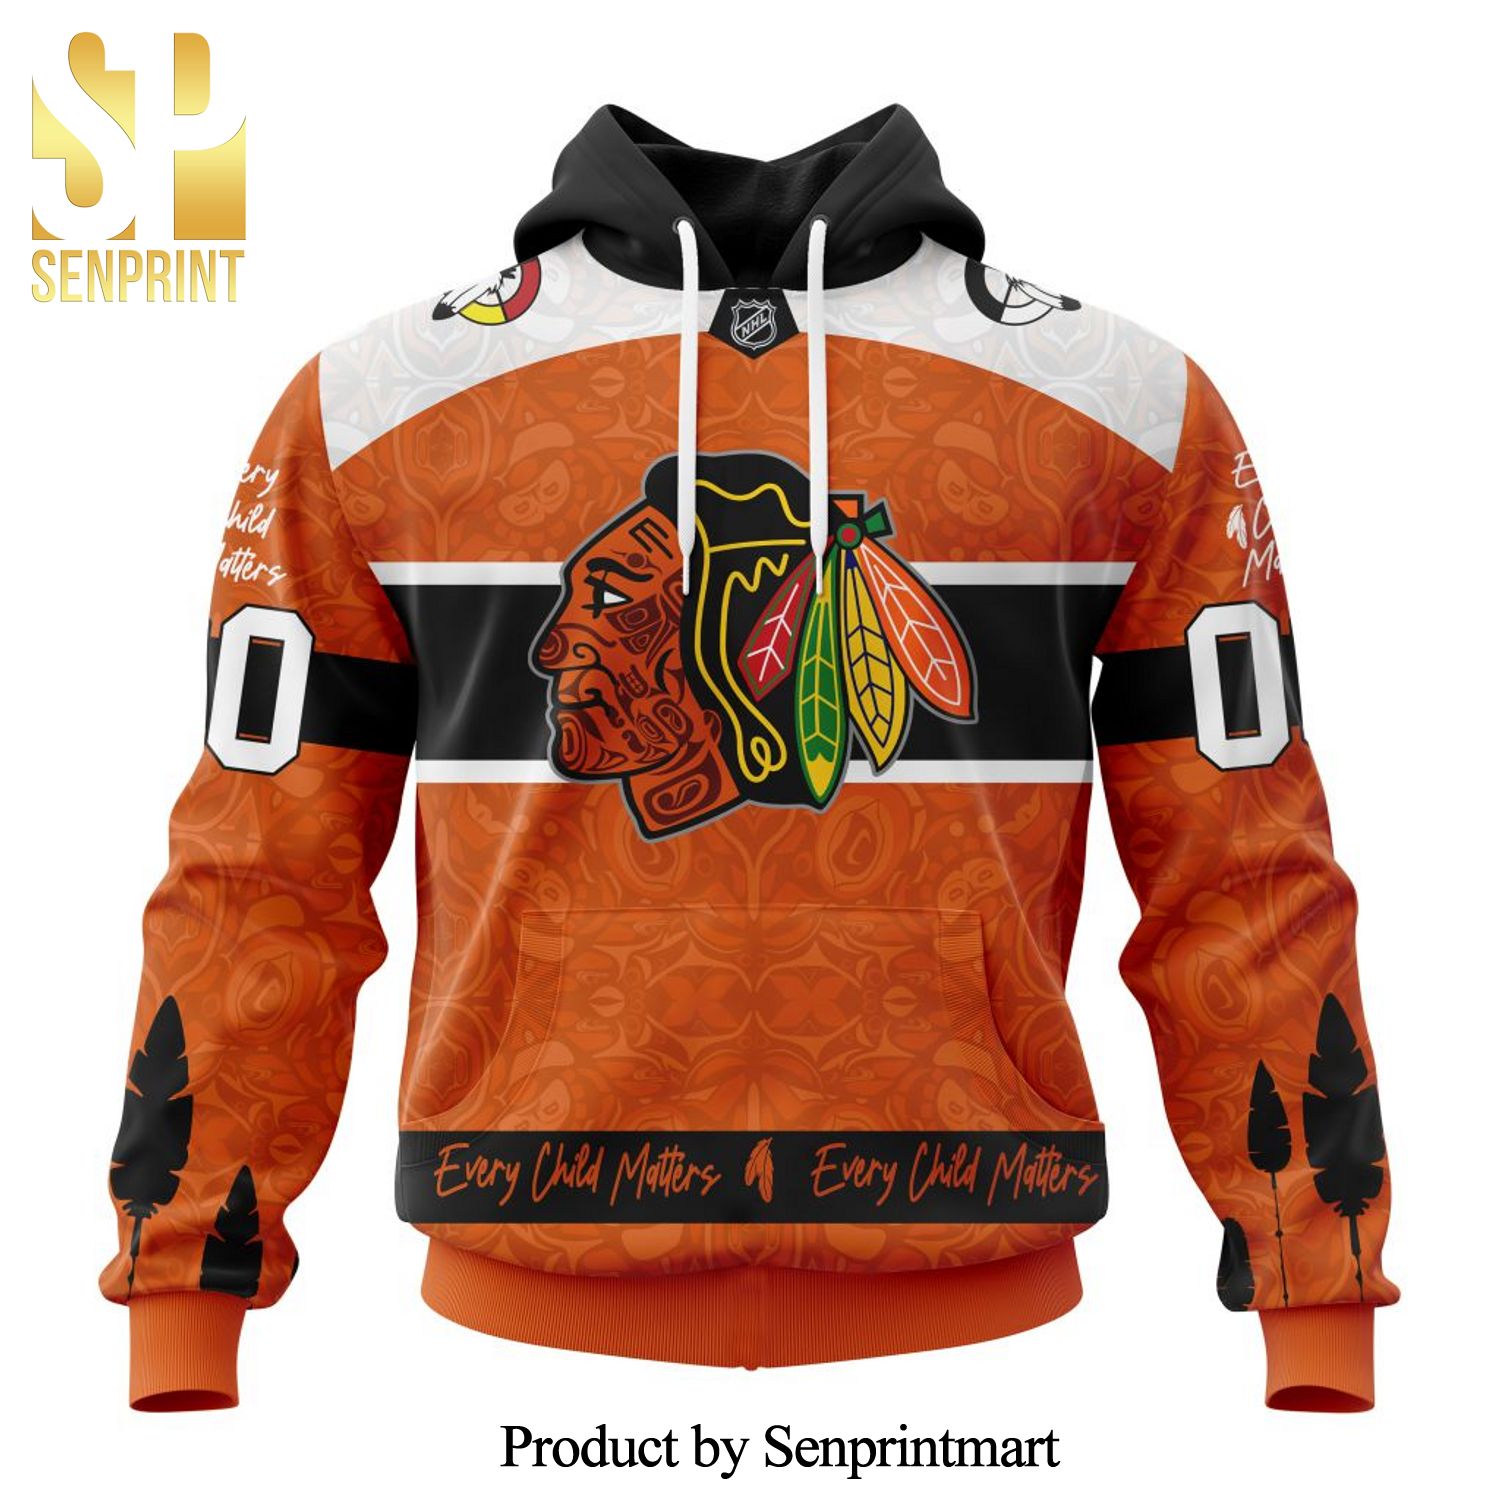 NHL Chicago BlackHawks For Sport Fans Support Child Live Maters All Over Print Shirt